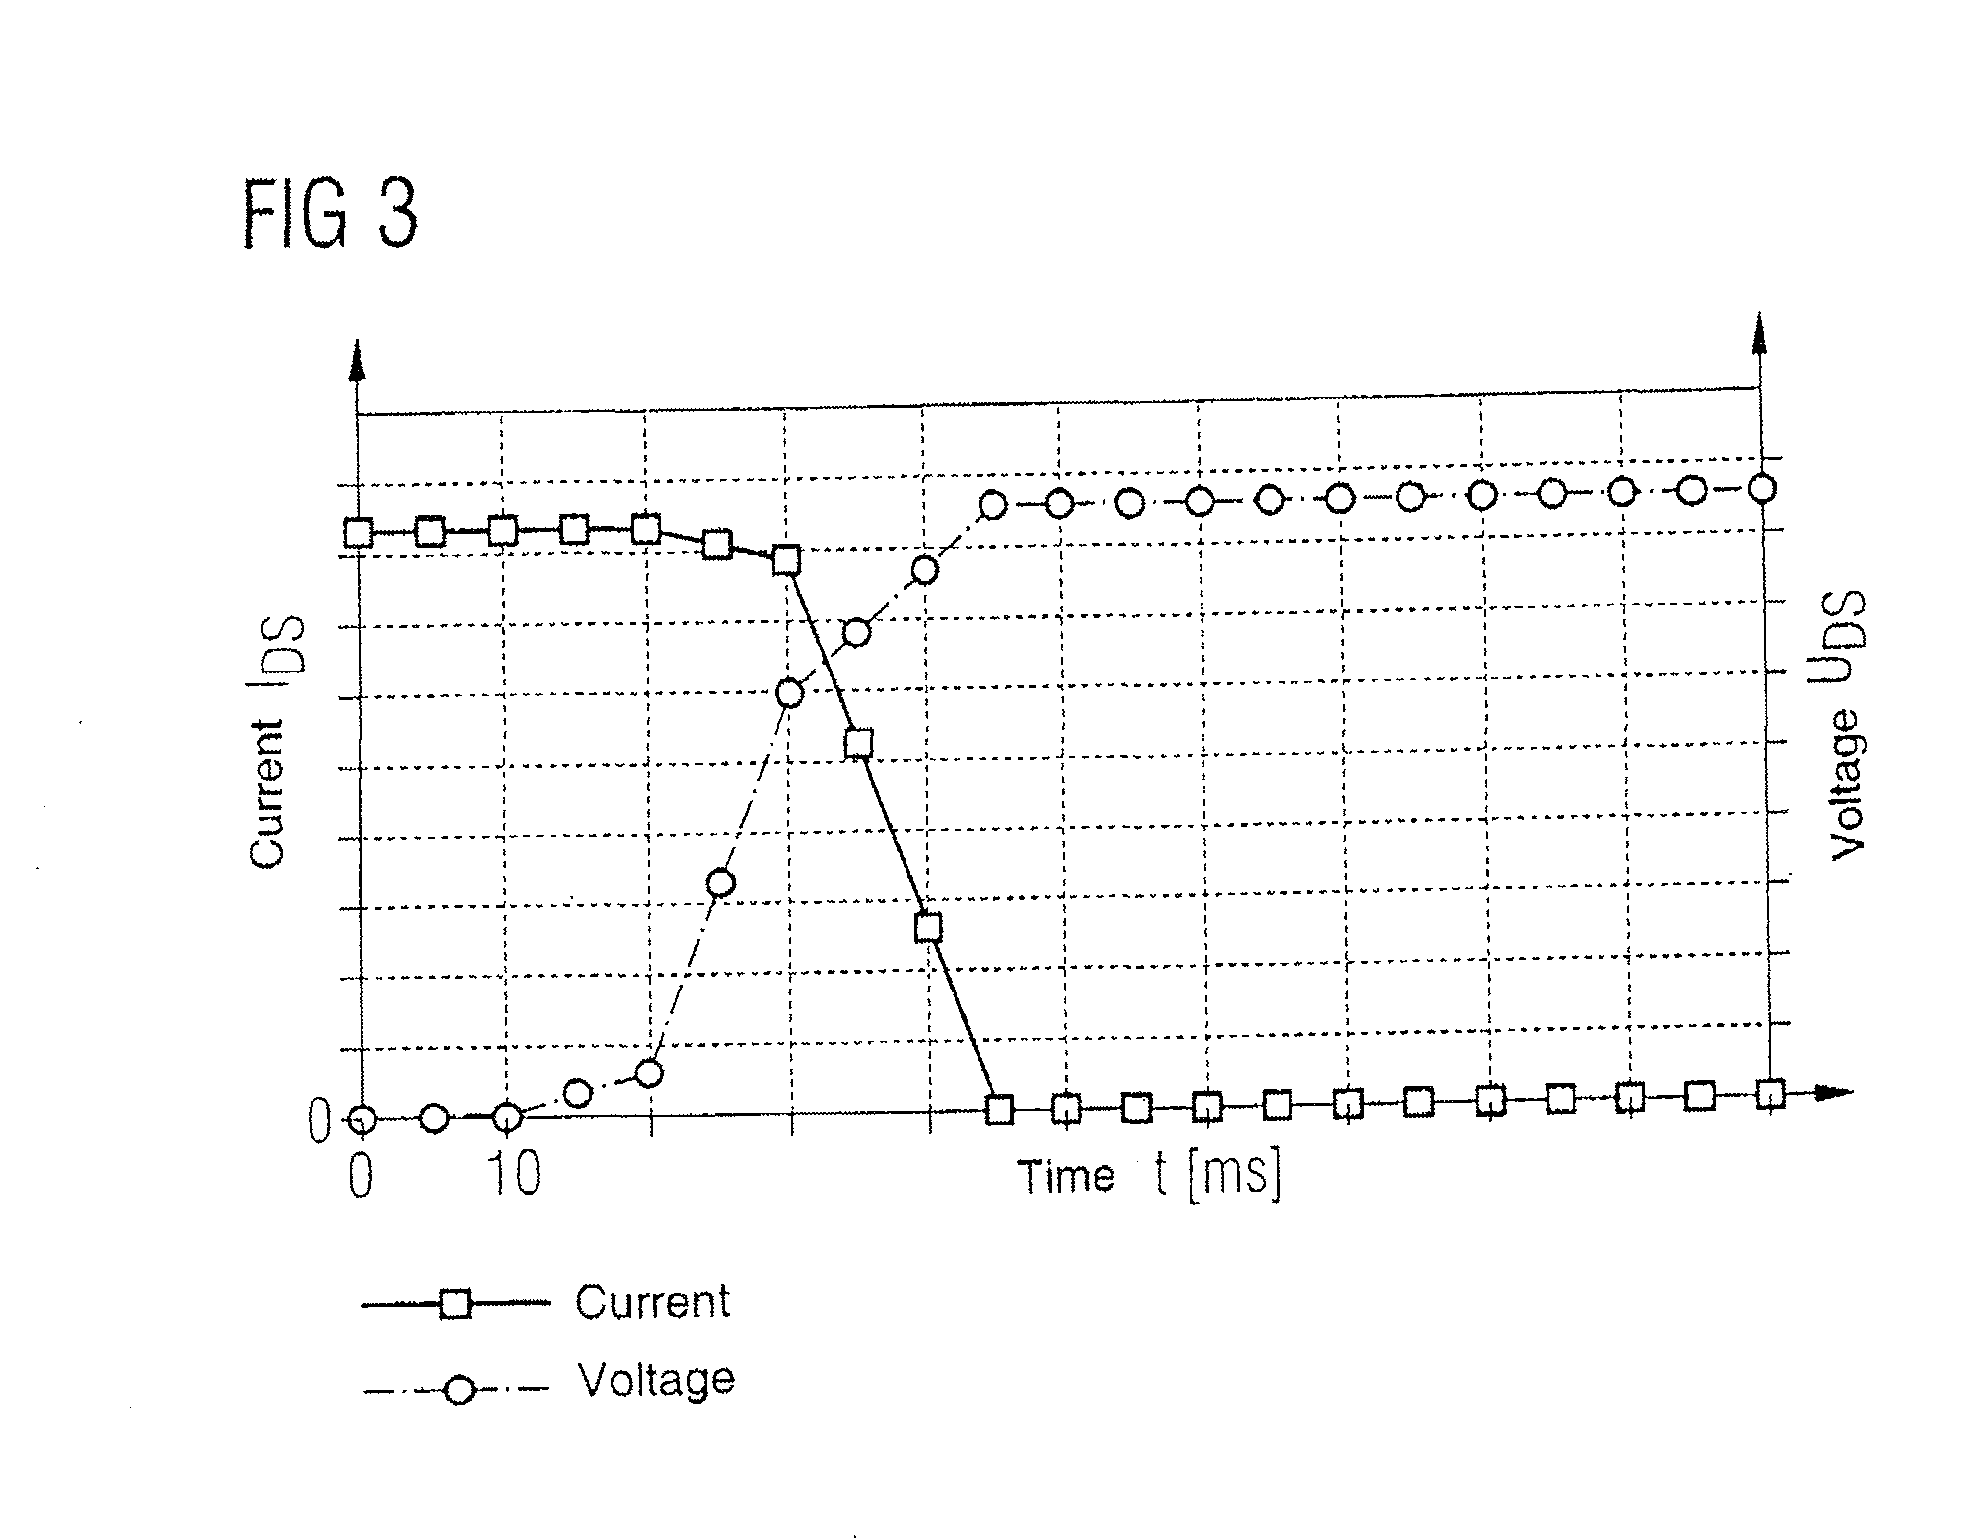 Power Semiconductor Component with Plate Capacitor Structure and Edge Termination